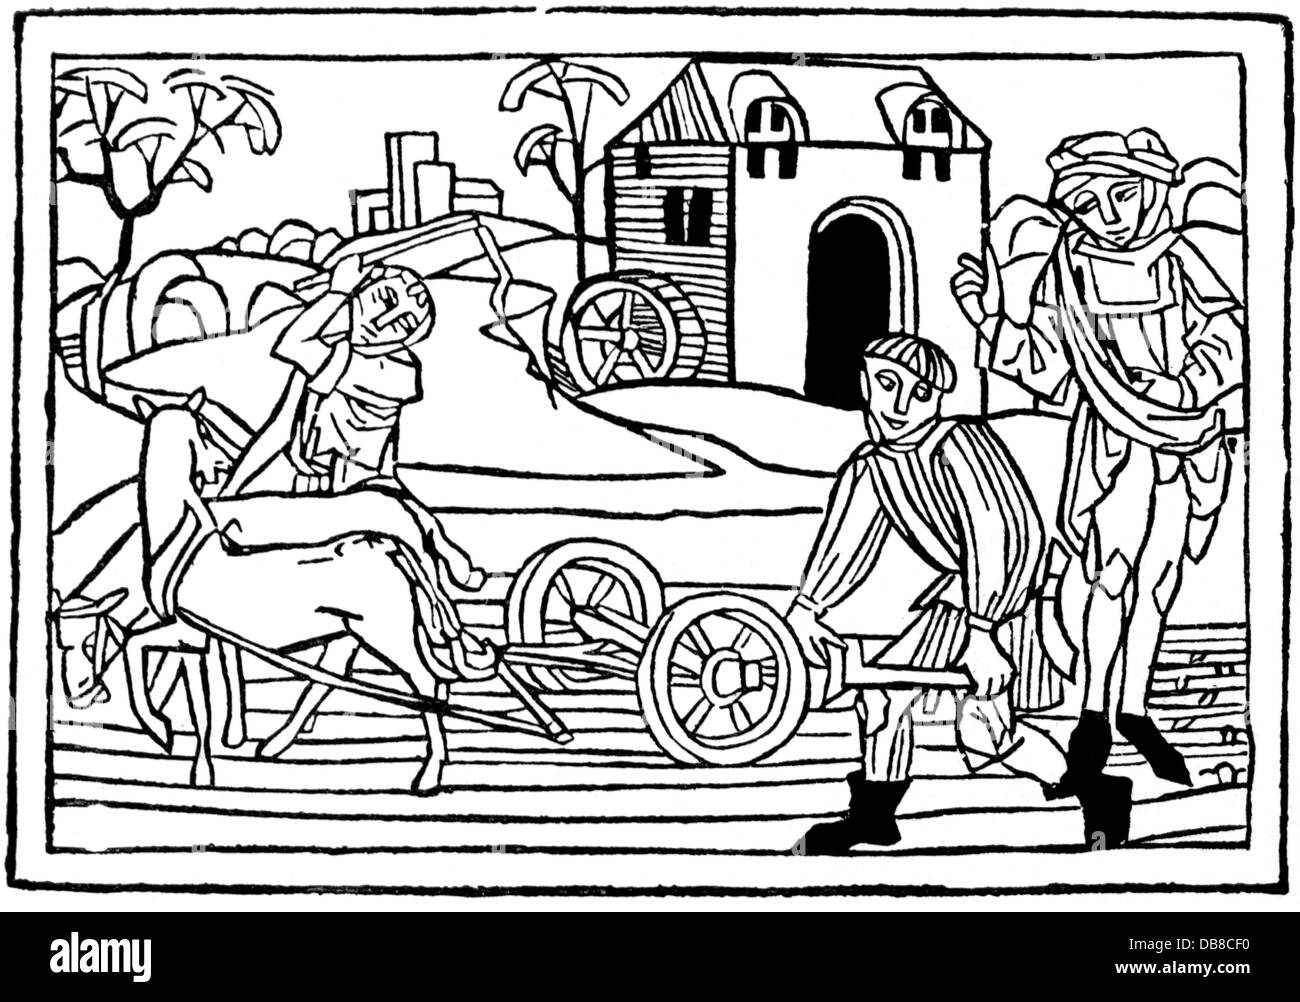 agriculture, agricultural work, plowing, peasants at drudgery, woodcut, 1474, Additional-Rights-Clearences-Not Available Stock Photo